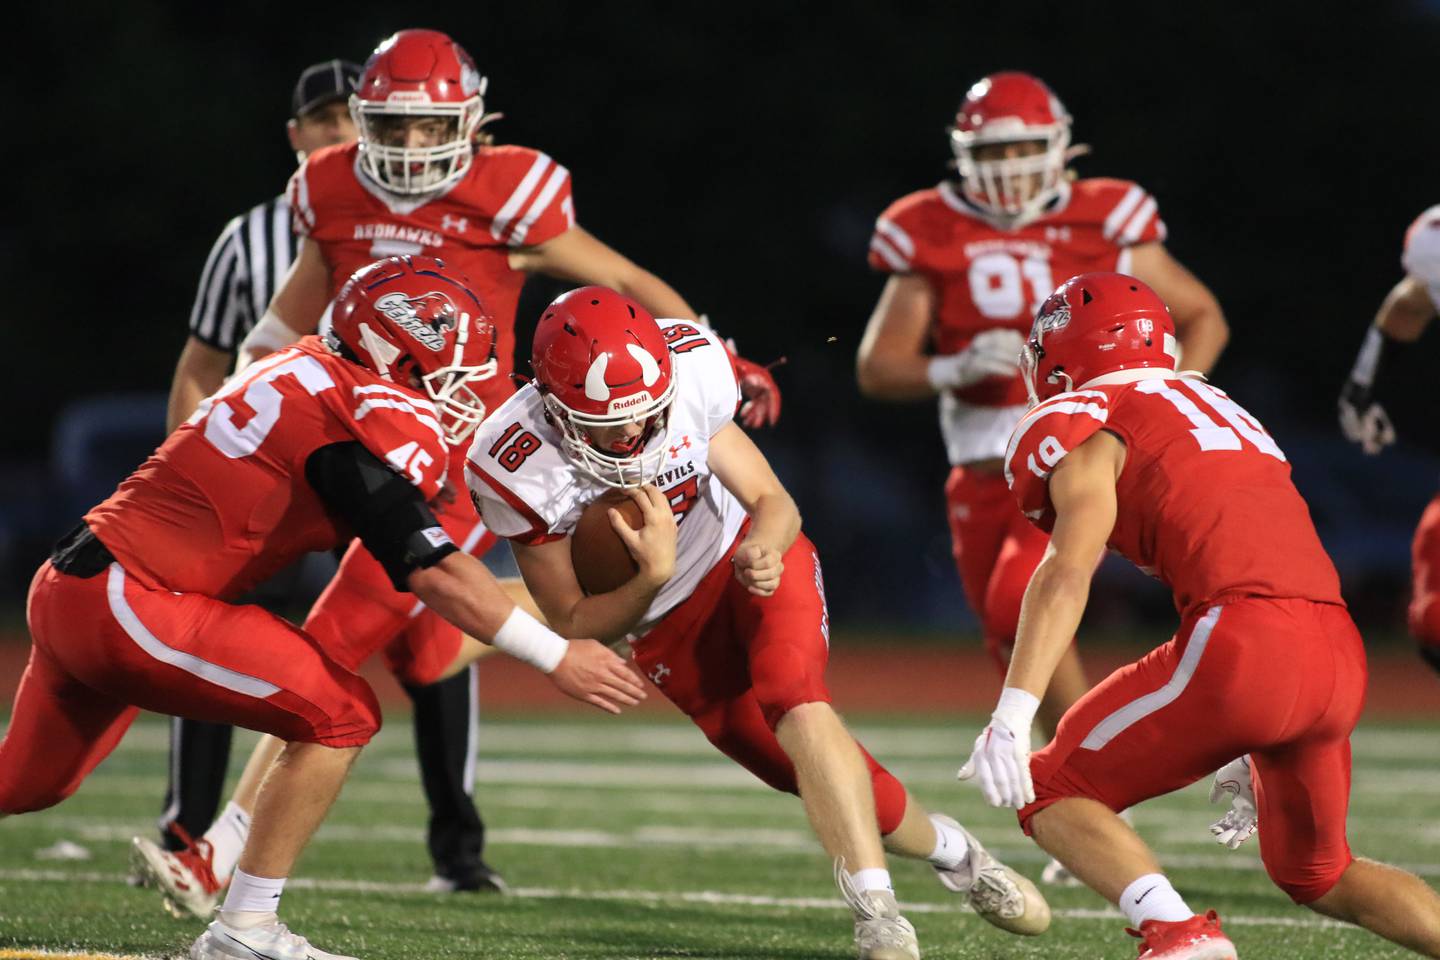 Hinsdale Central's Billy Cernugel (18) scrambles during football game between Hinsdale Central at Naperville Central.  August 26, 2022.